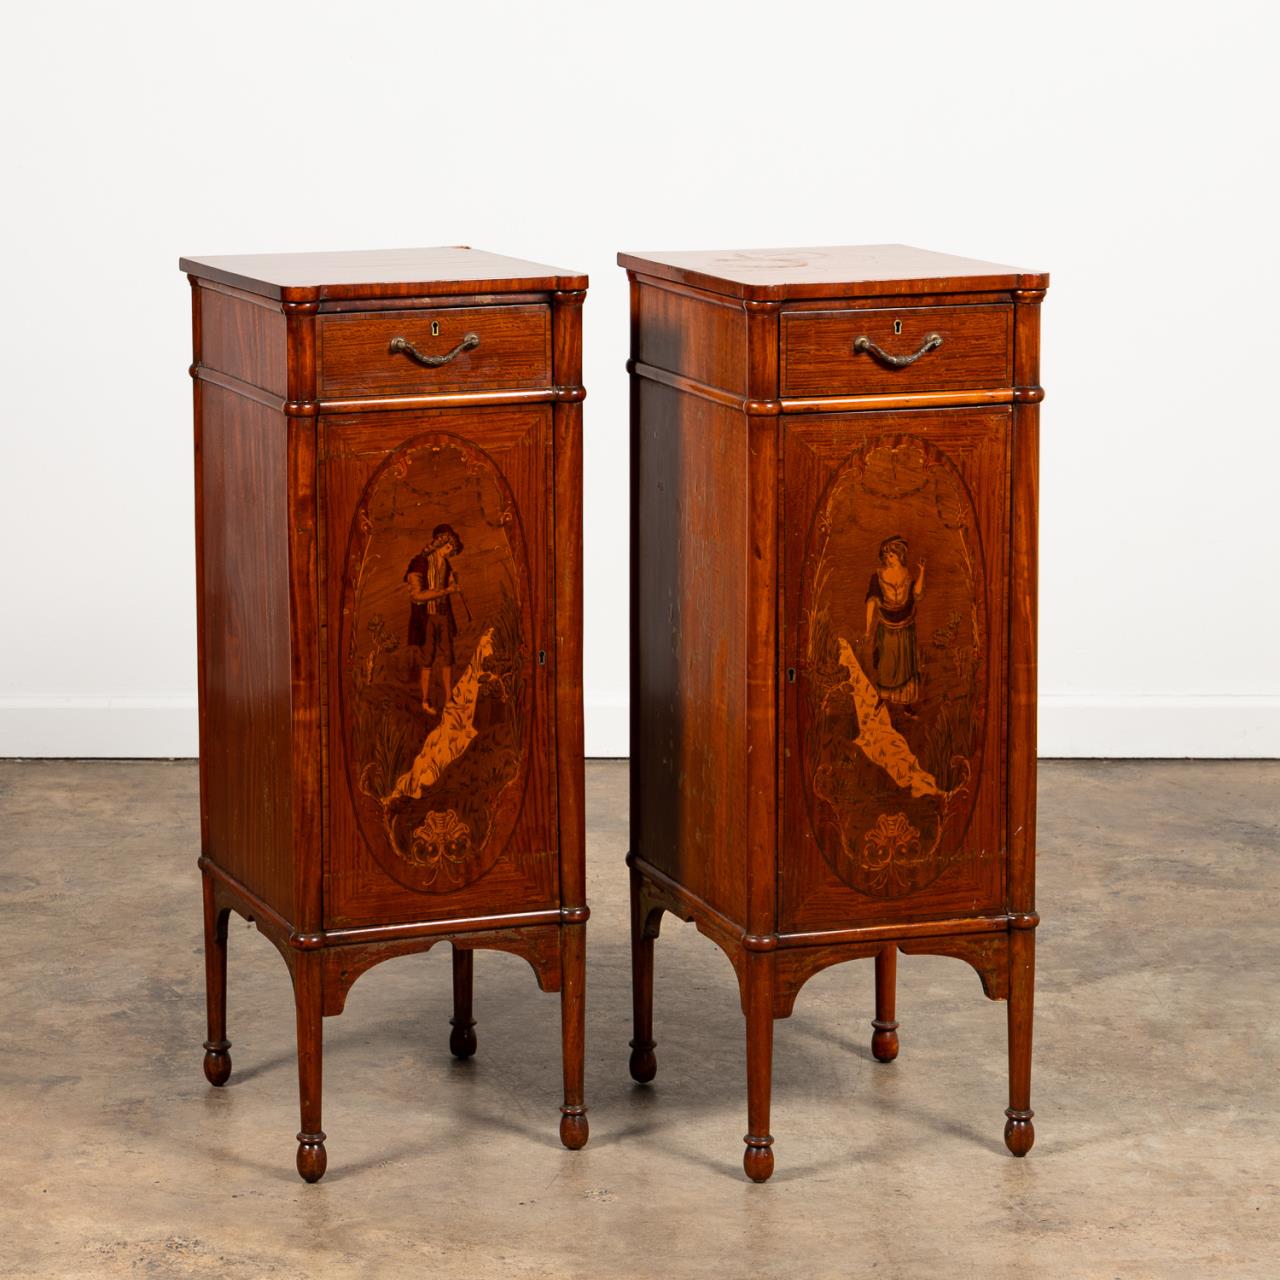 PAIR OF EDWARDIAN MARQUETRY INLAID